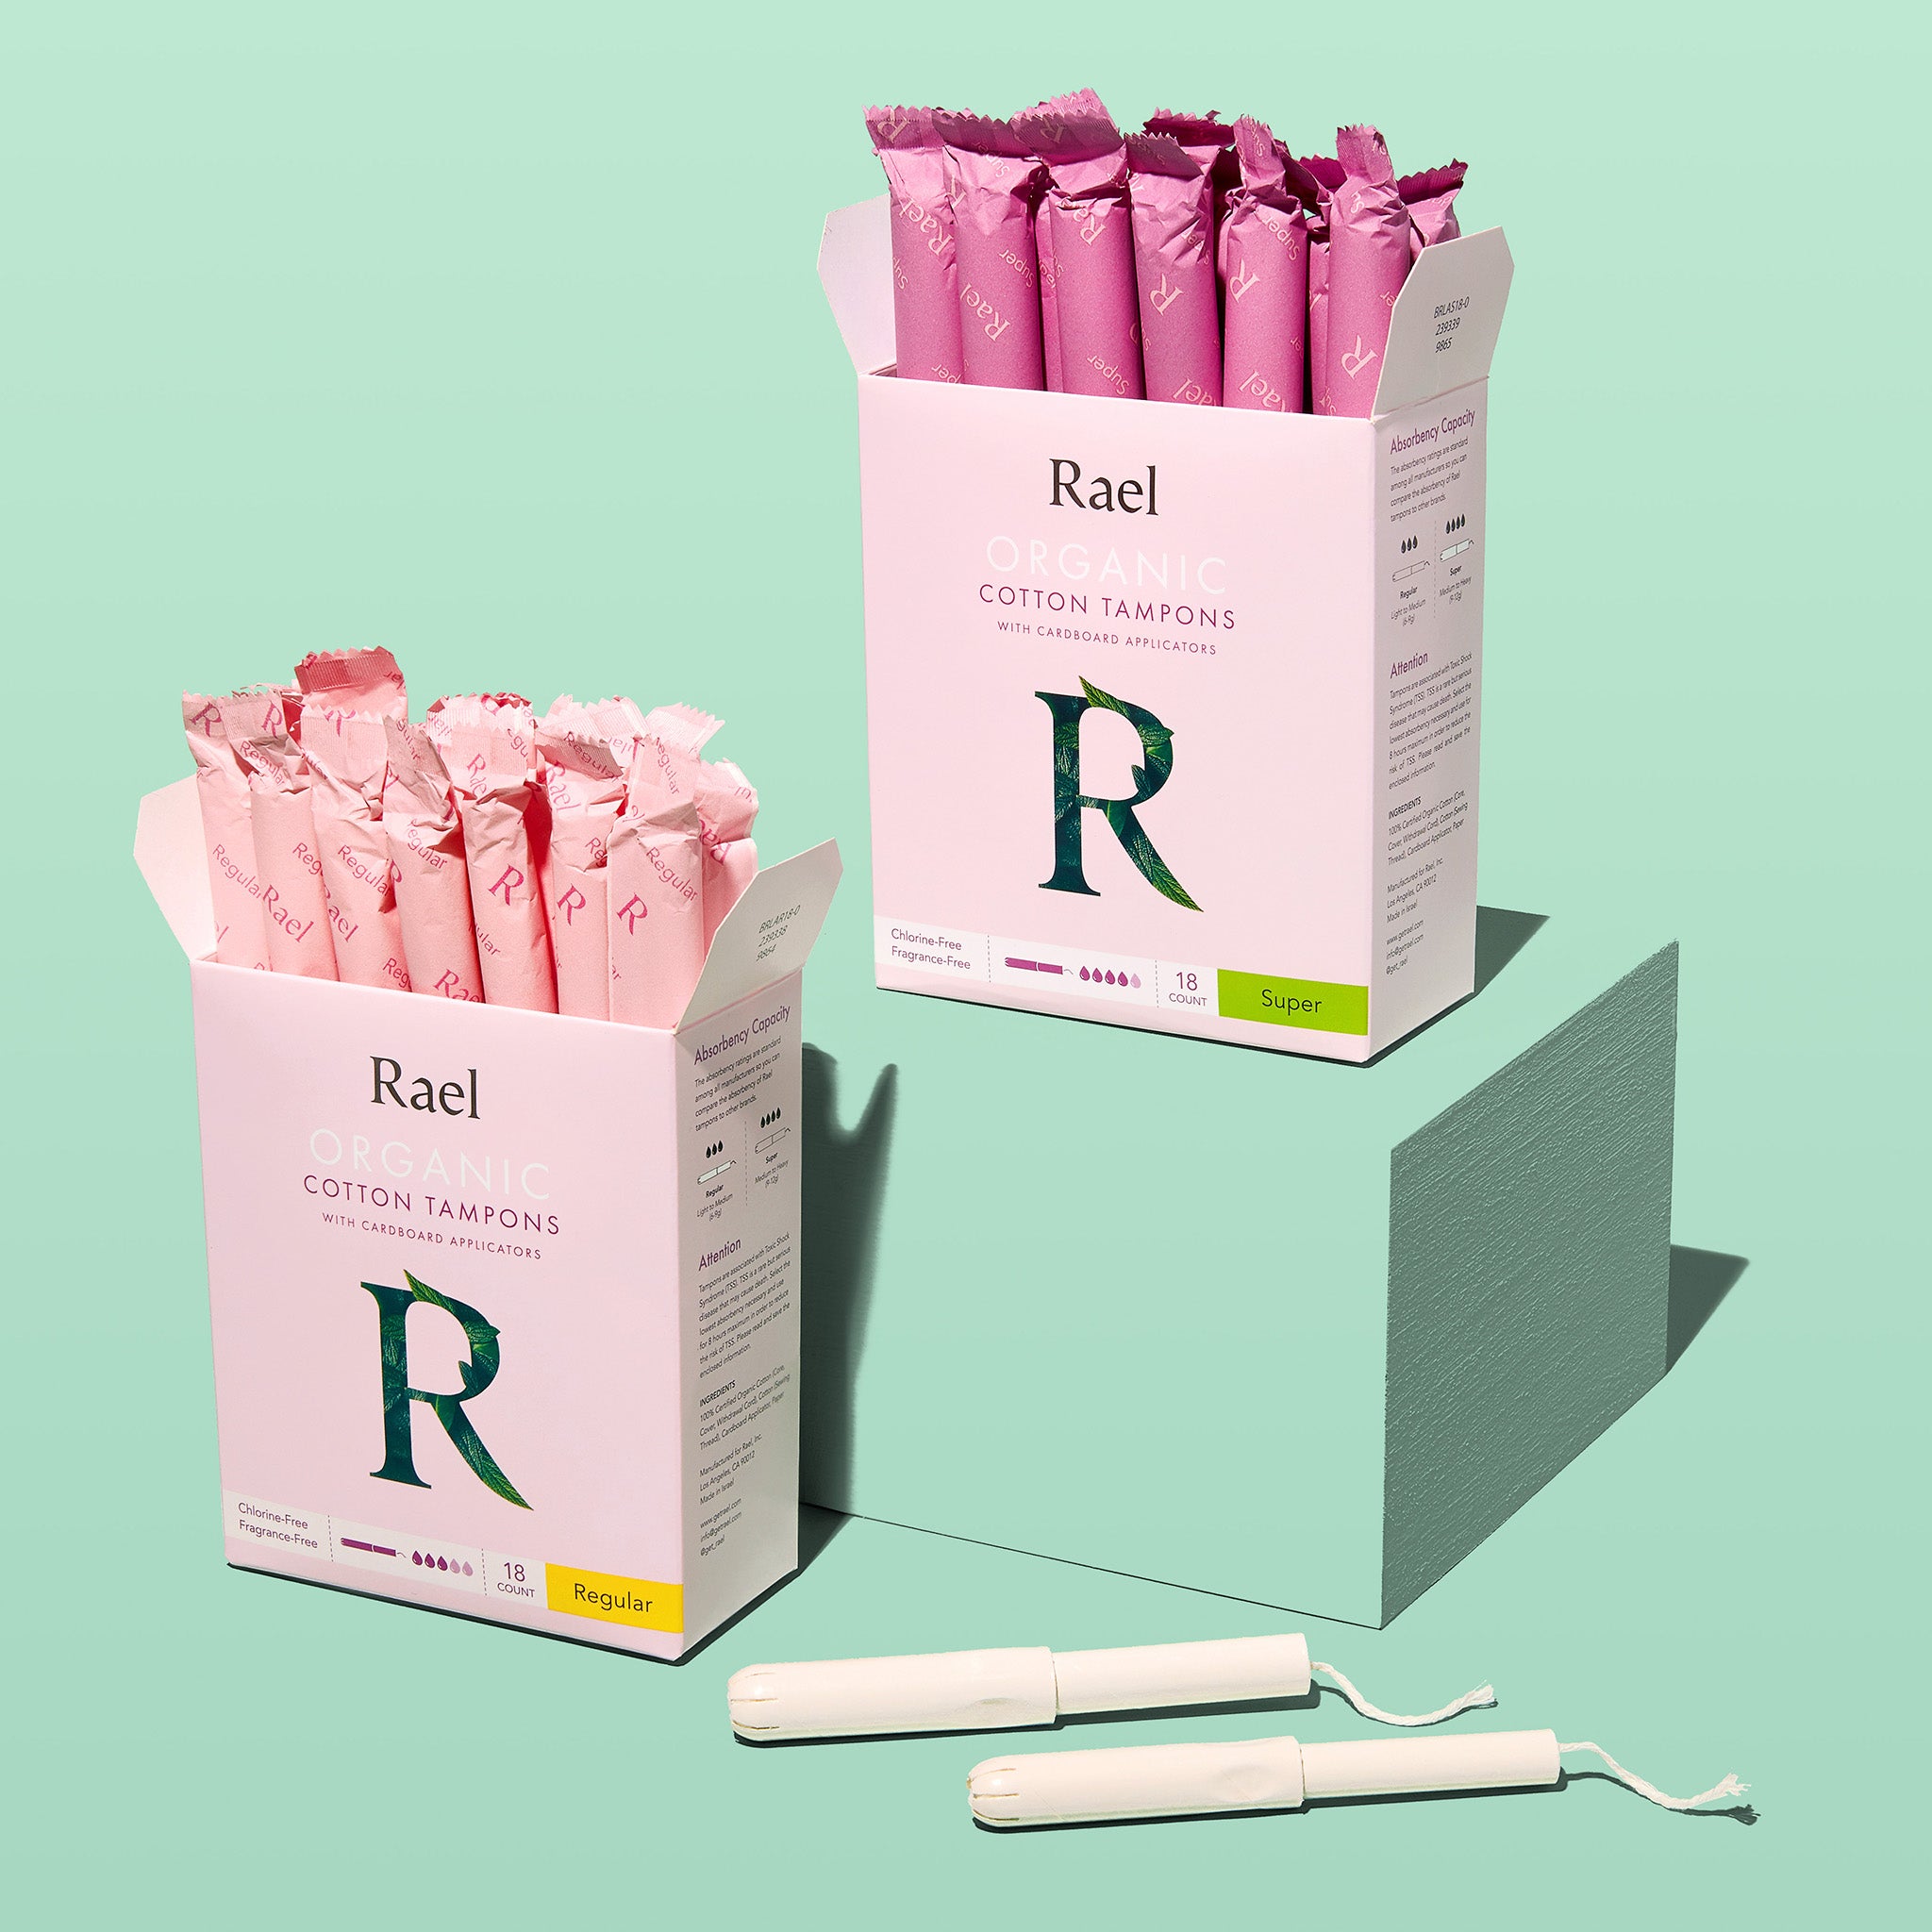 Organic Cotton Tampons with Plastic Applicator